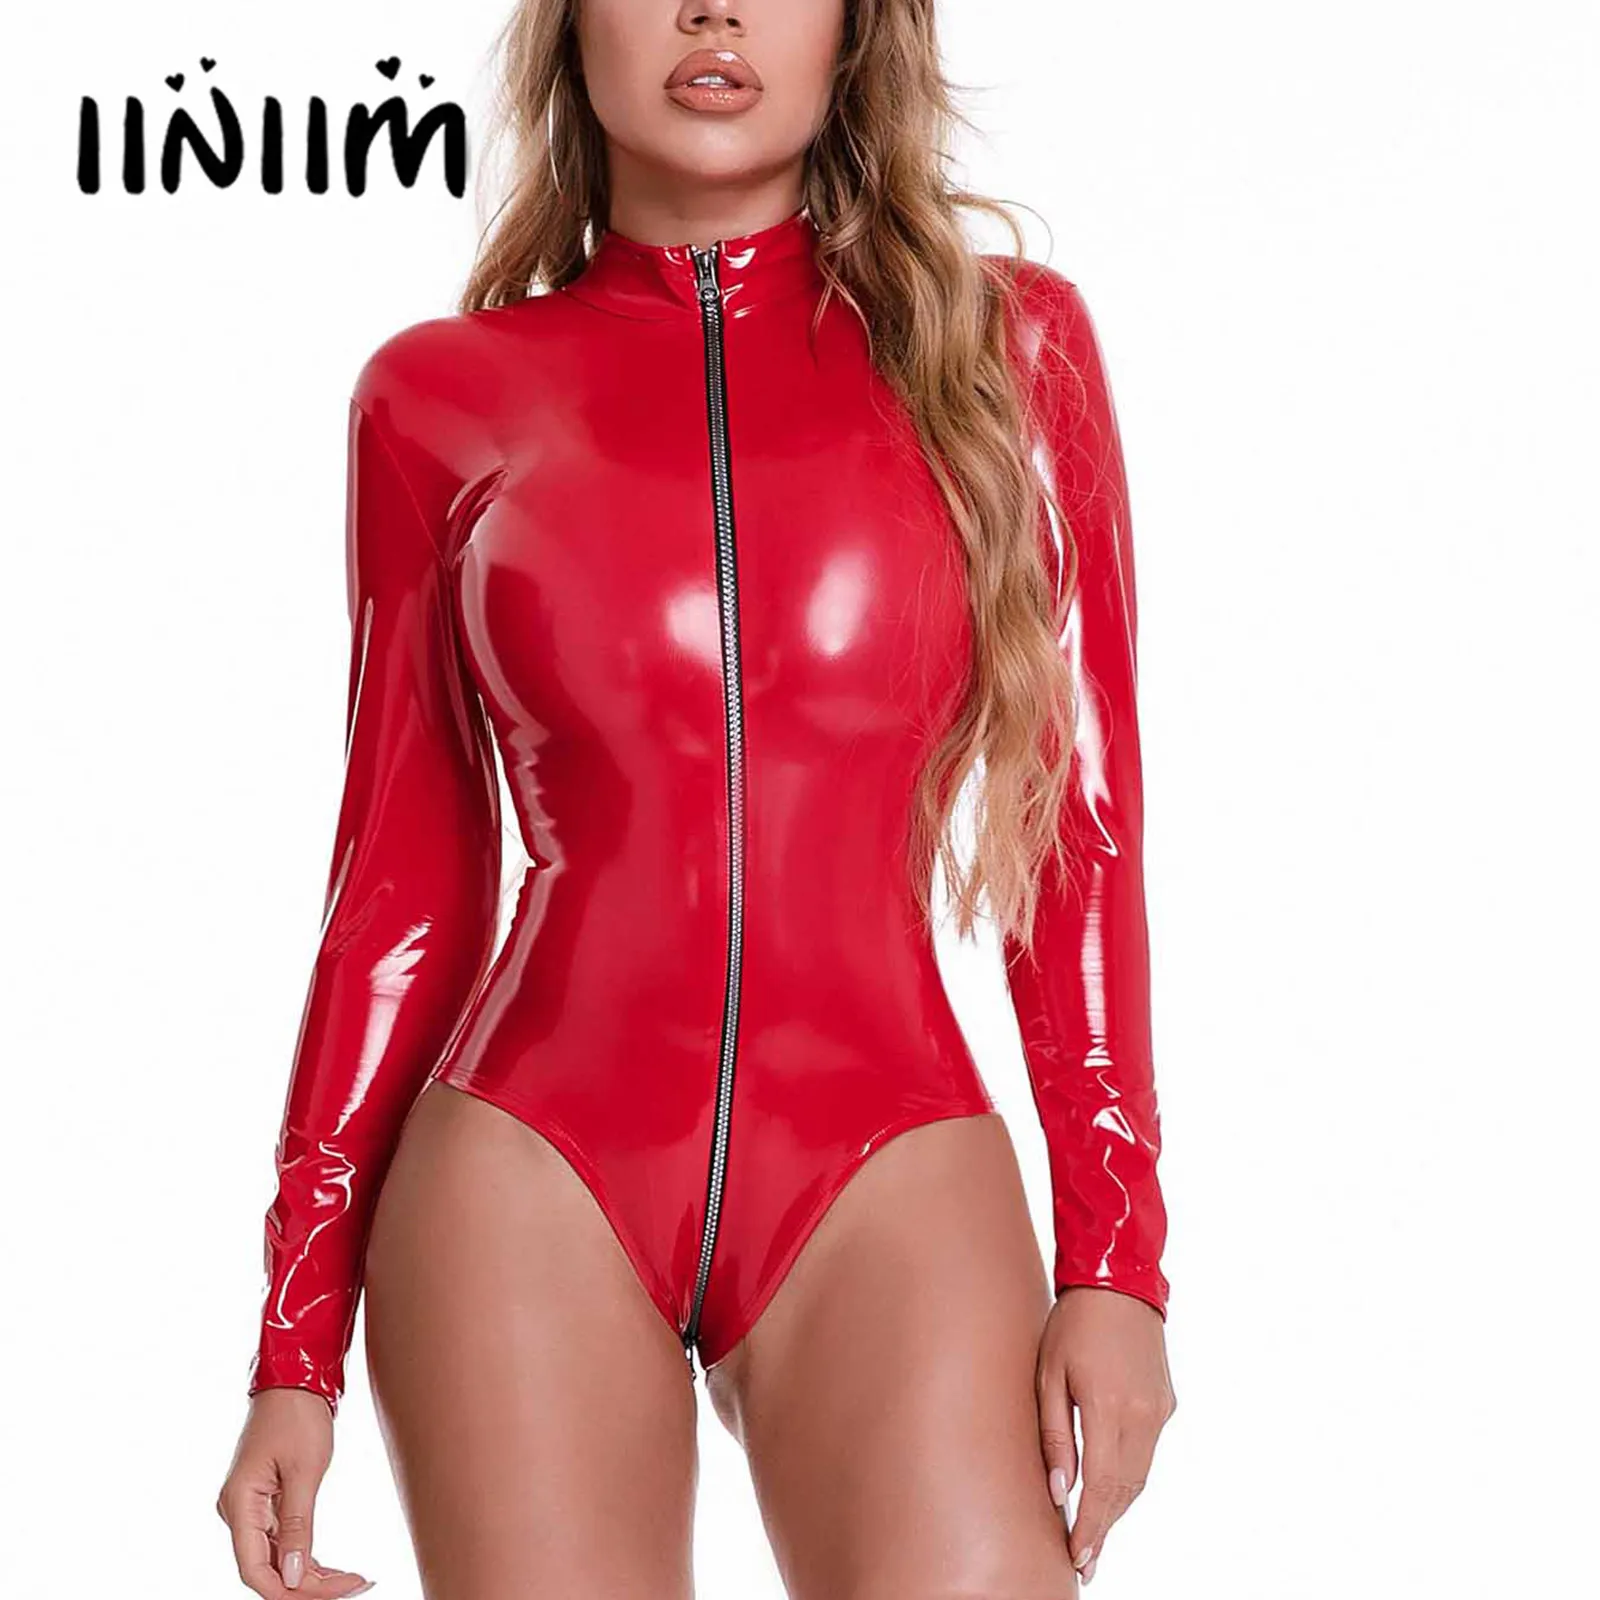 

Womens Hot Wet Look Patent Leather Rave Outfit for Pole Dancing Mock Neck Glossy Long Sleeve Bodysuit Zipper Catsuit Clubwear